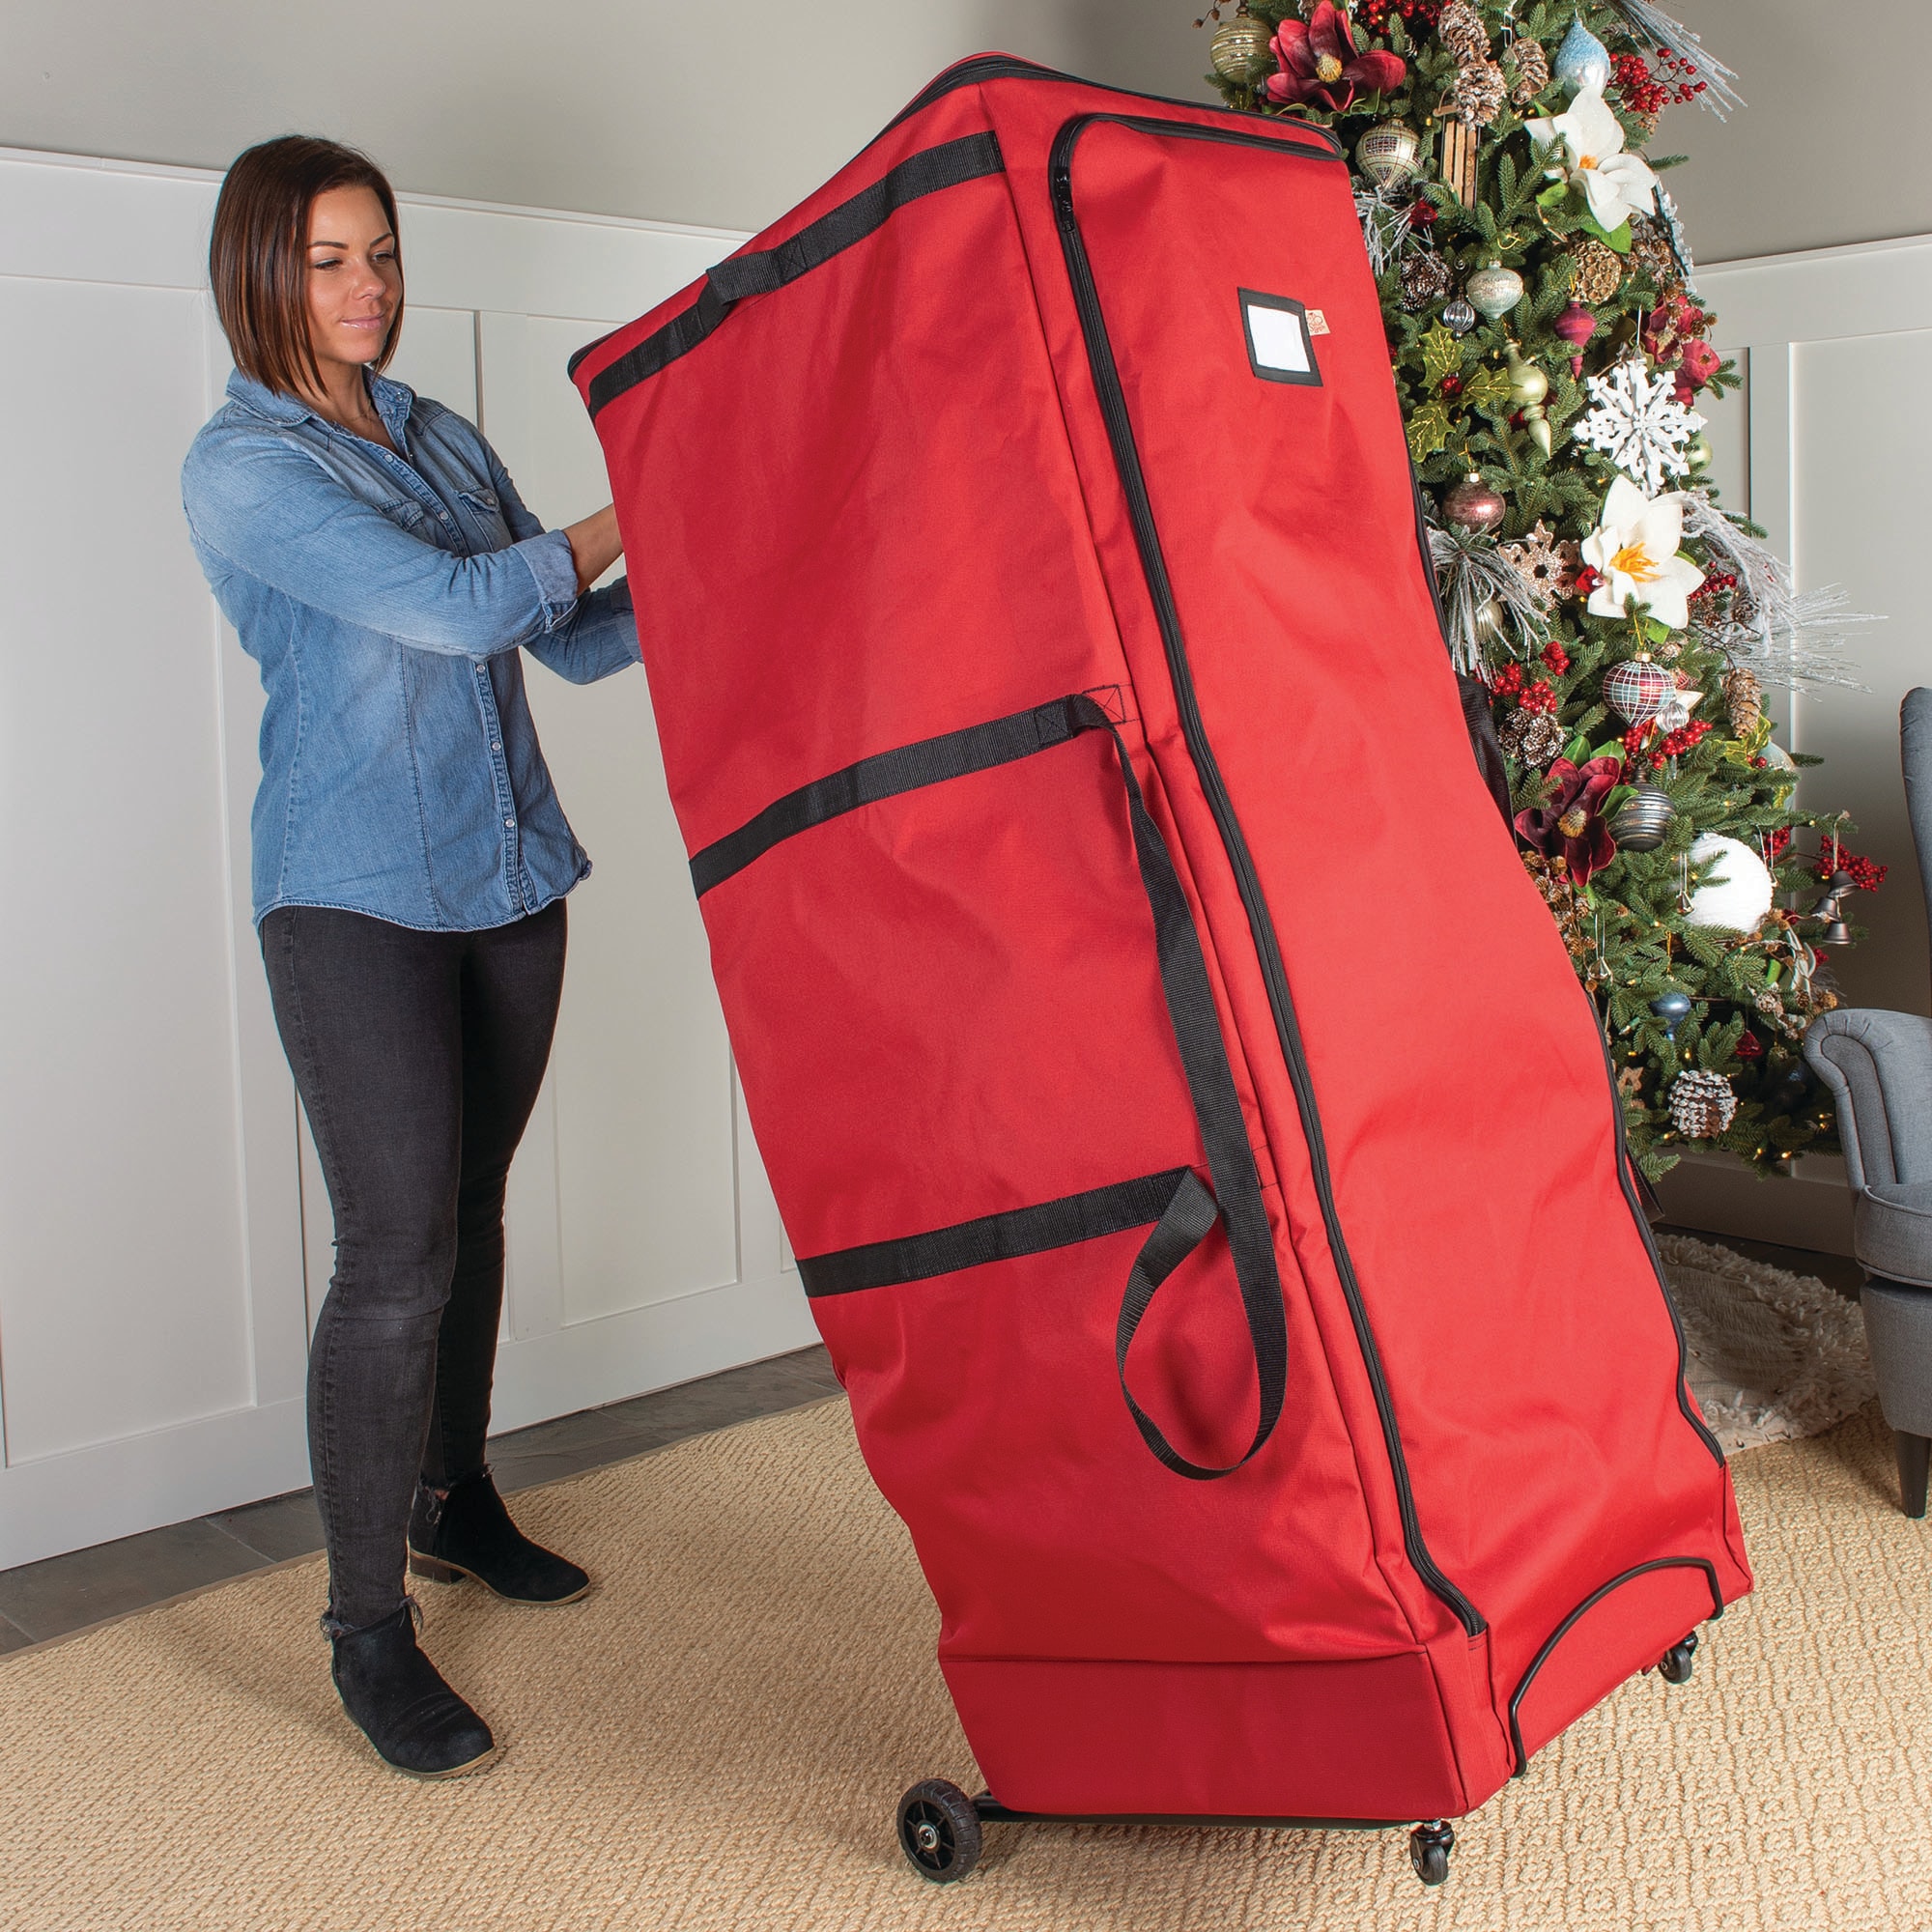 4 Foot Christmas Tree Storage Bag Red with Zipper Unopened 48"L x 20"H x 15"W 